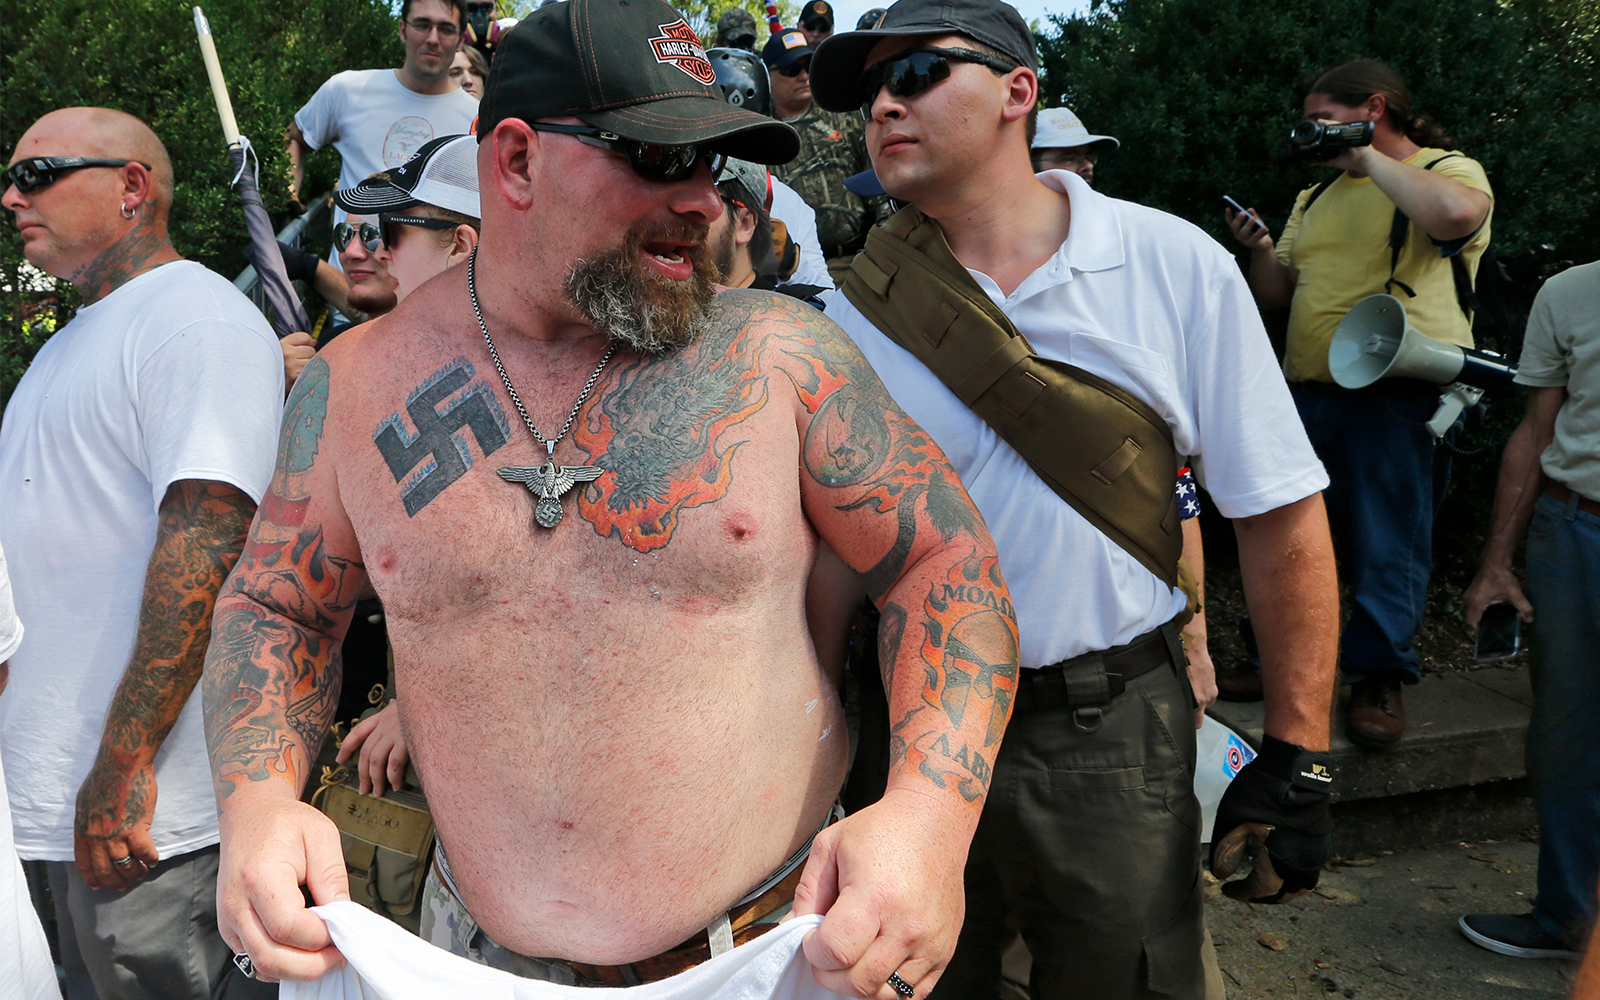 Killing of white supremacist called 'declaration of war